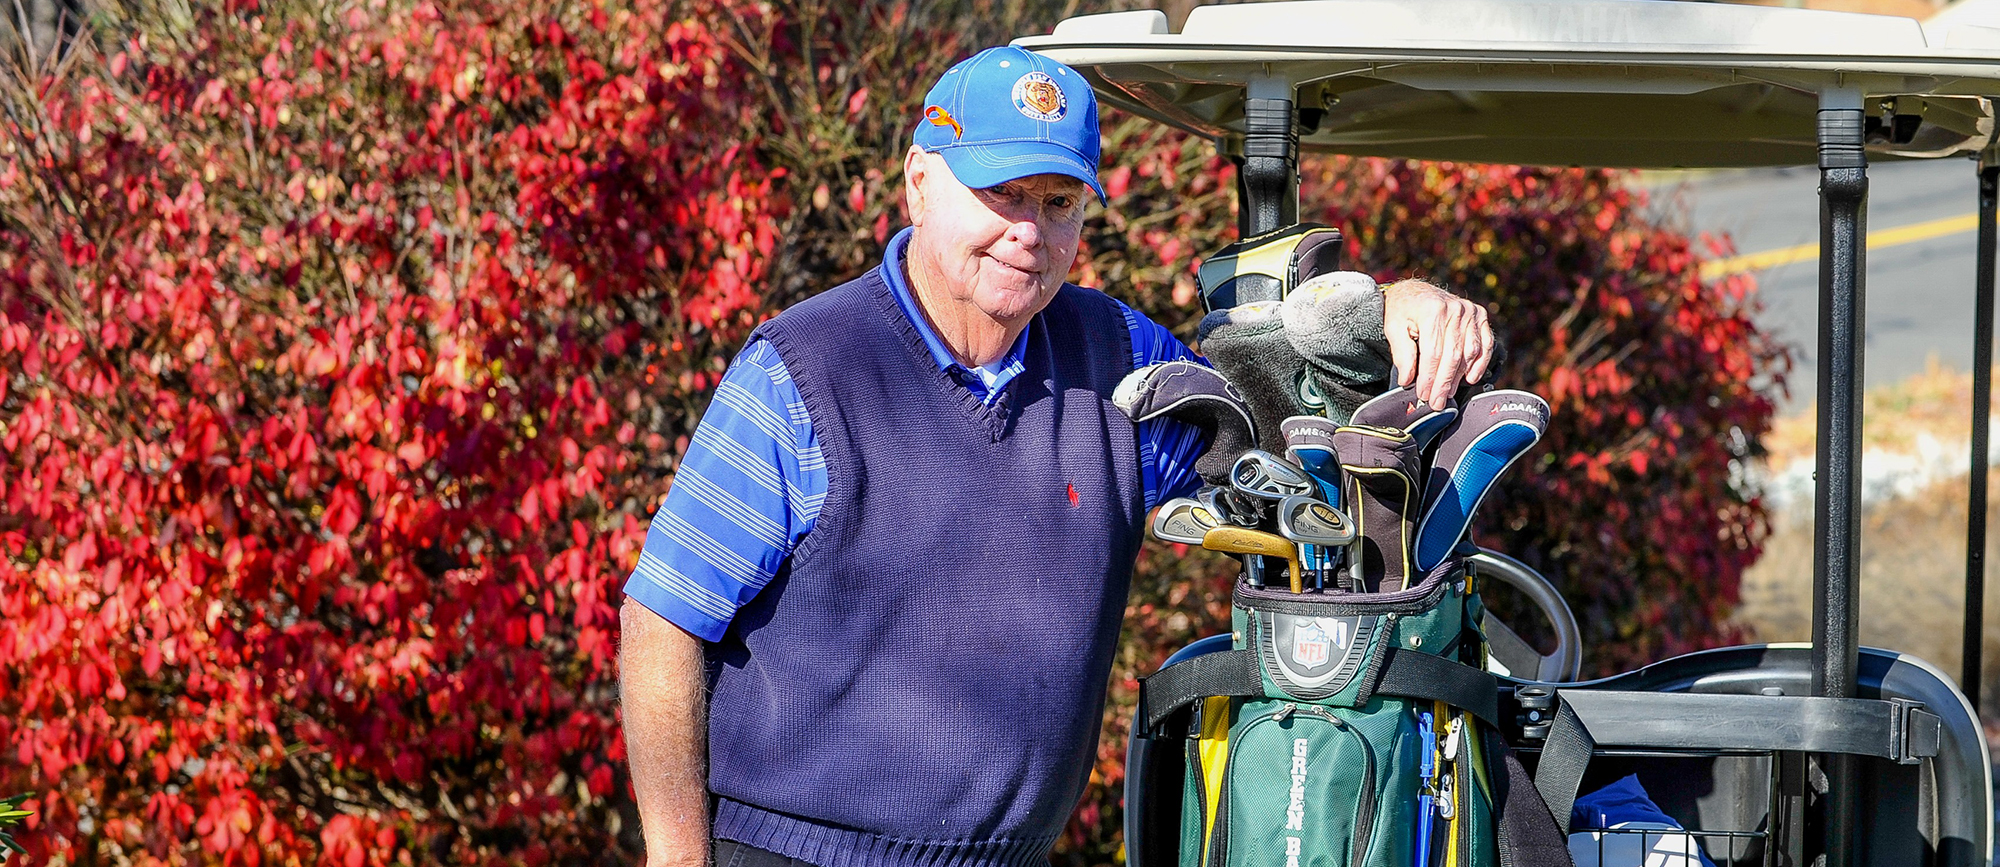 SPRINGFIELD REPUBLICAN: "WNEU men's golf coach 'Red' Downes saving his best for last"